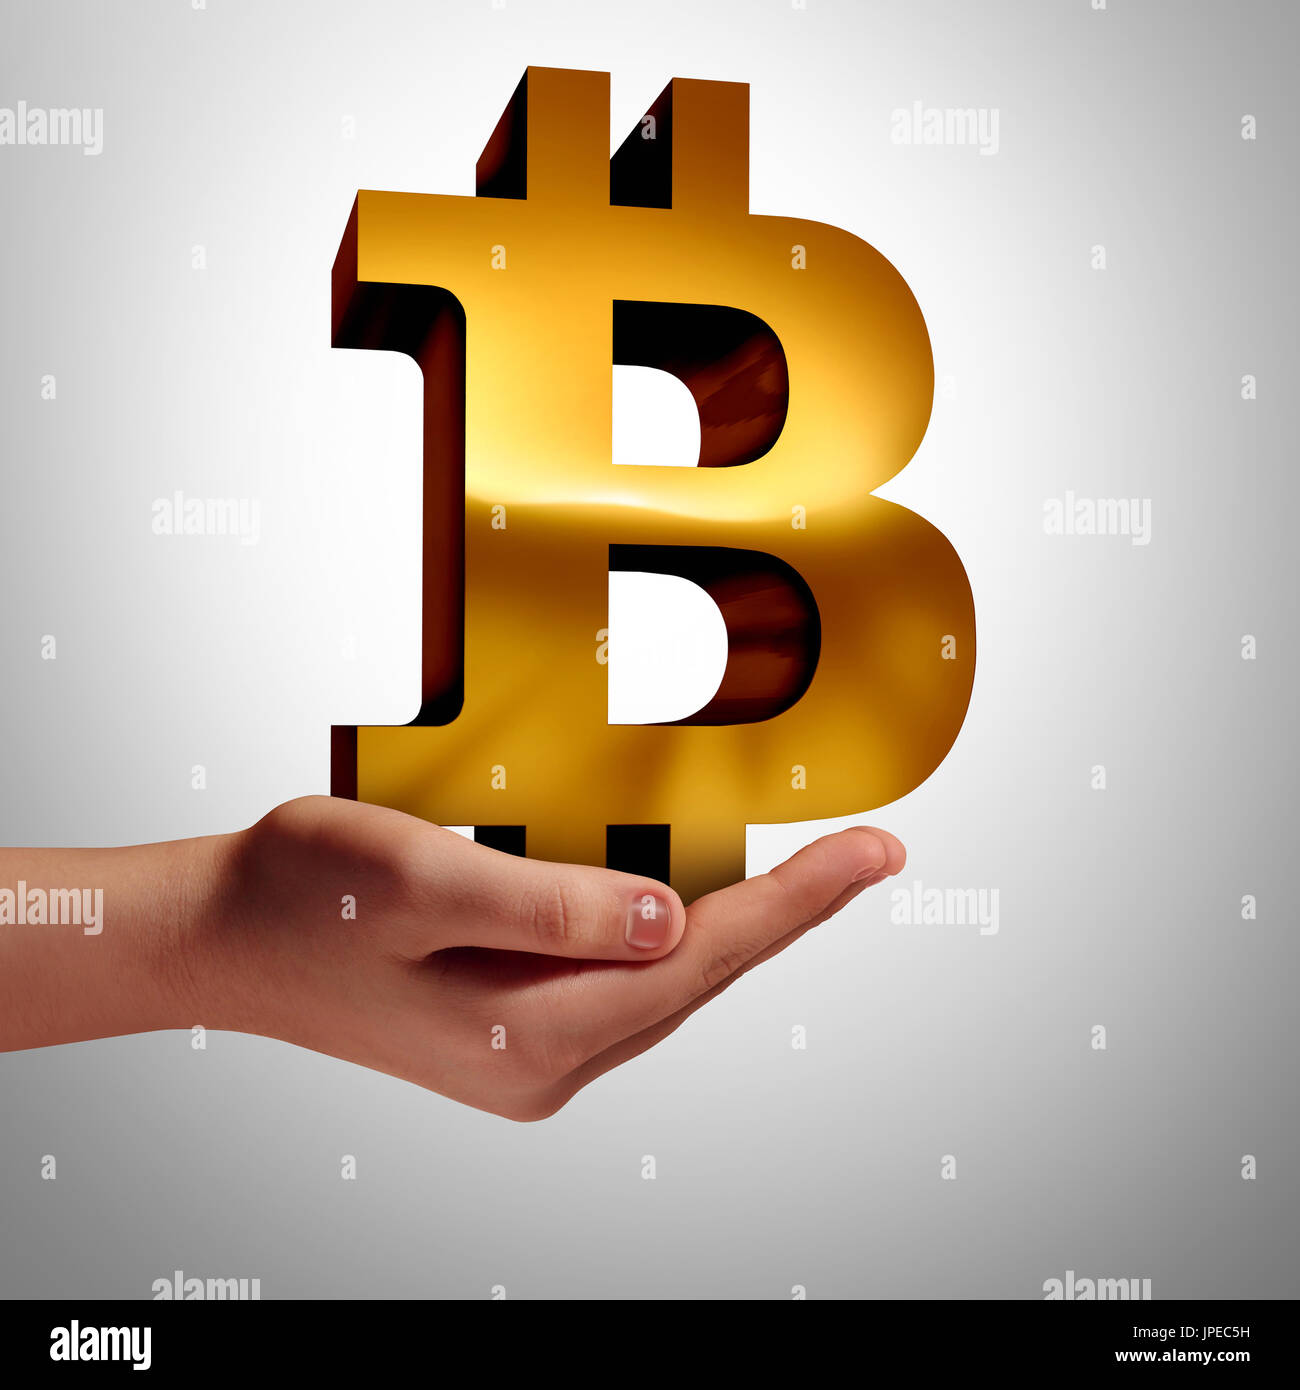 Bitcoin currency and symbol of cryptocurrency digital internet currency economic concept as a human hand holding online electronic money. Stock Photo